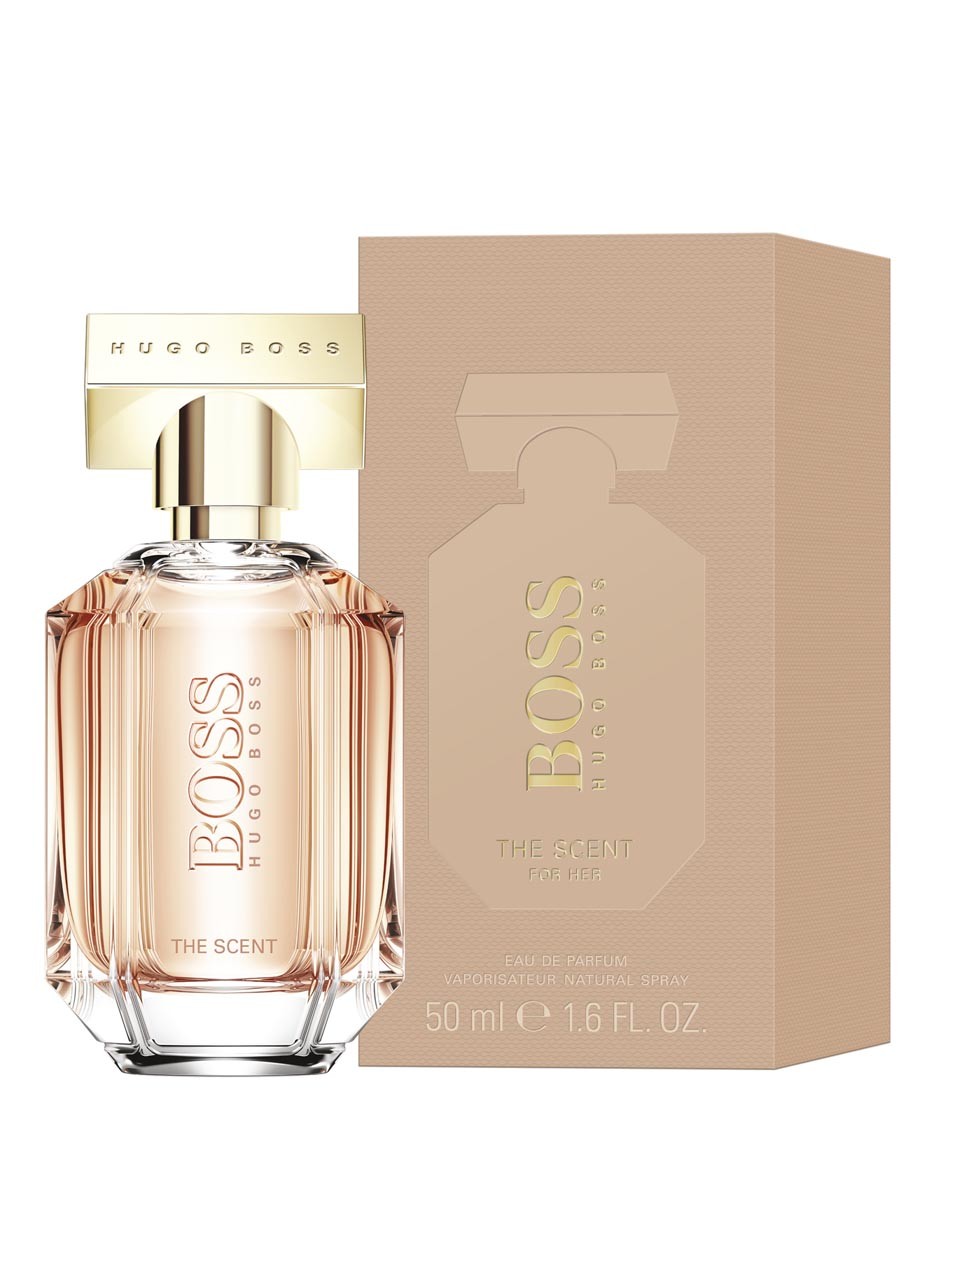 hugo boss the scent parfum edition for her